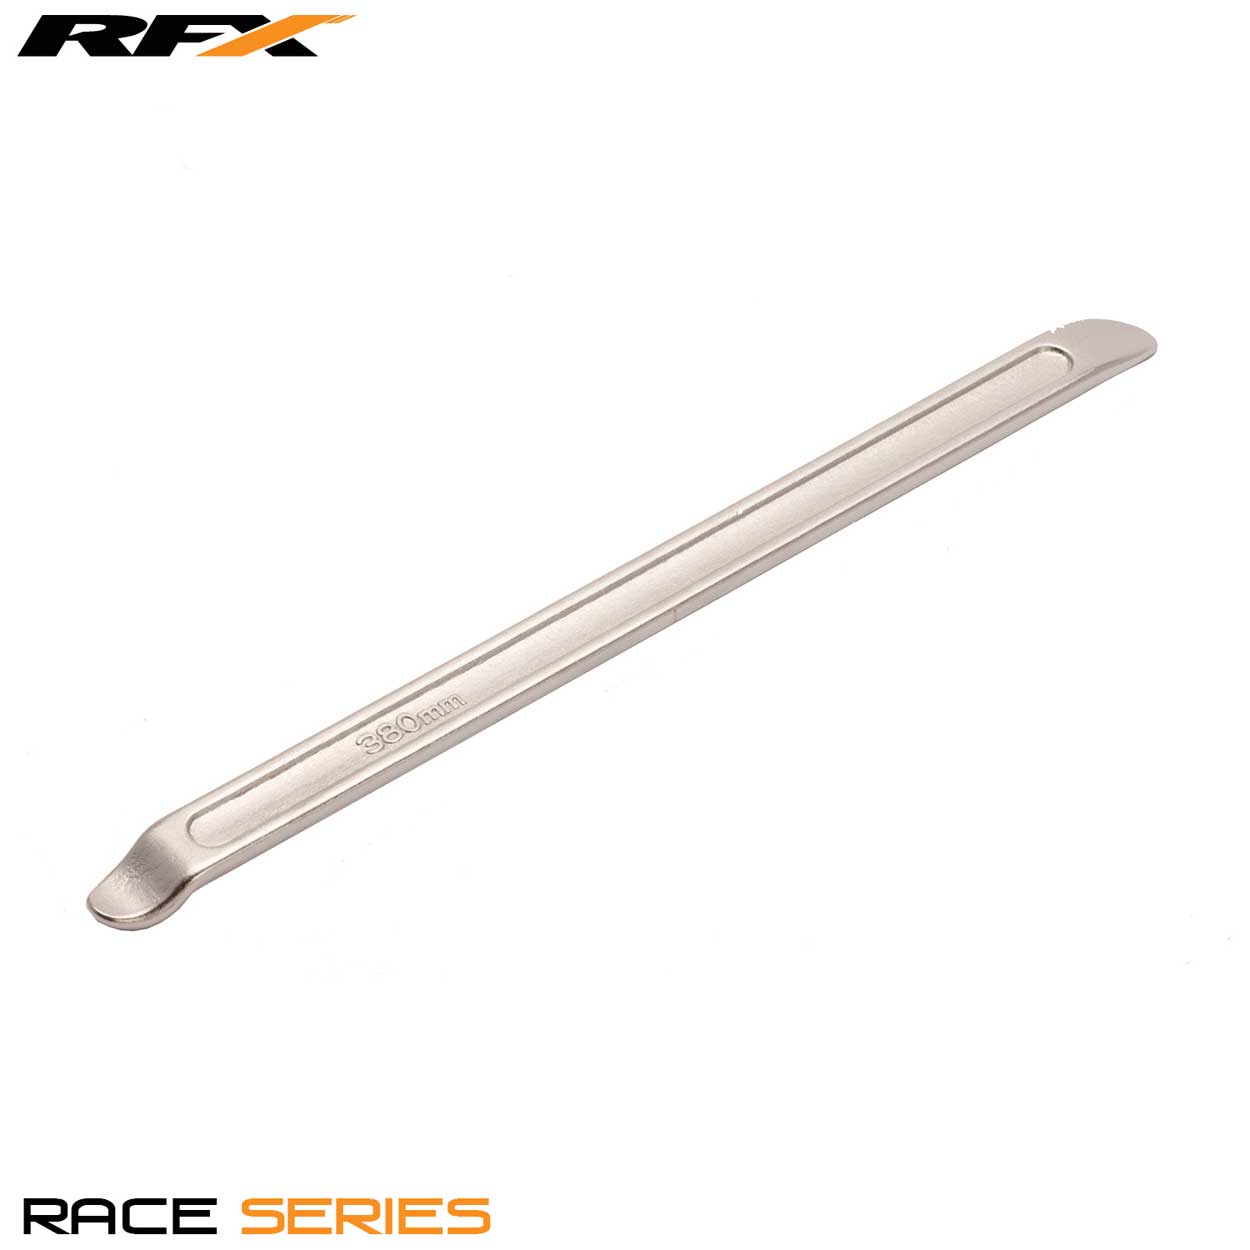 RFX Race Dual Spoon end Tyre Lever Silver Universal 240mm / 9.5in Long